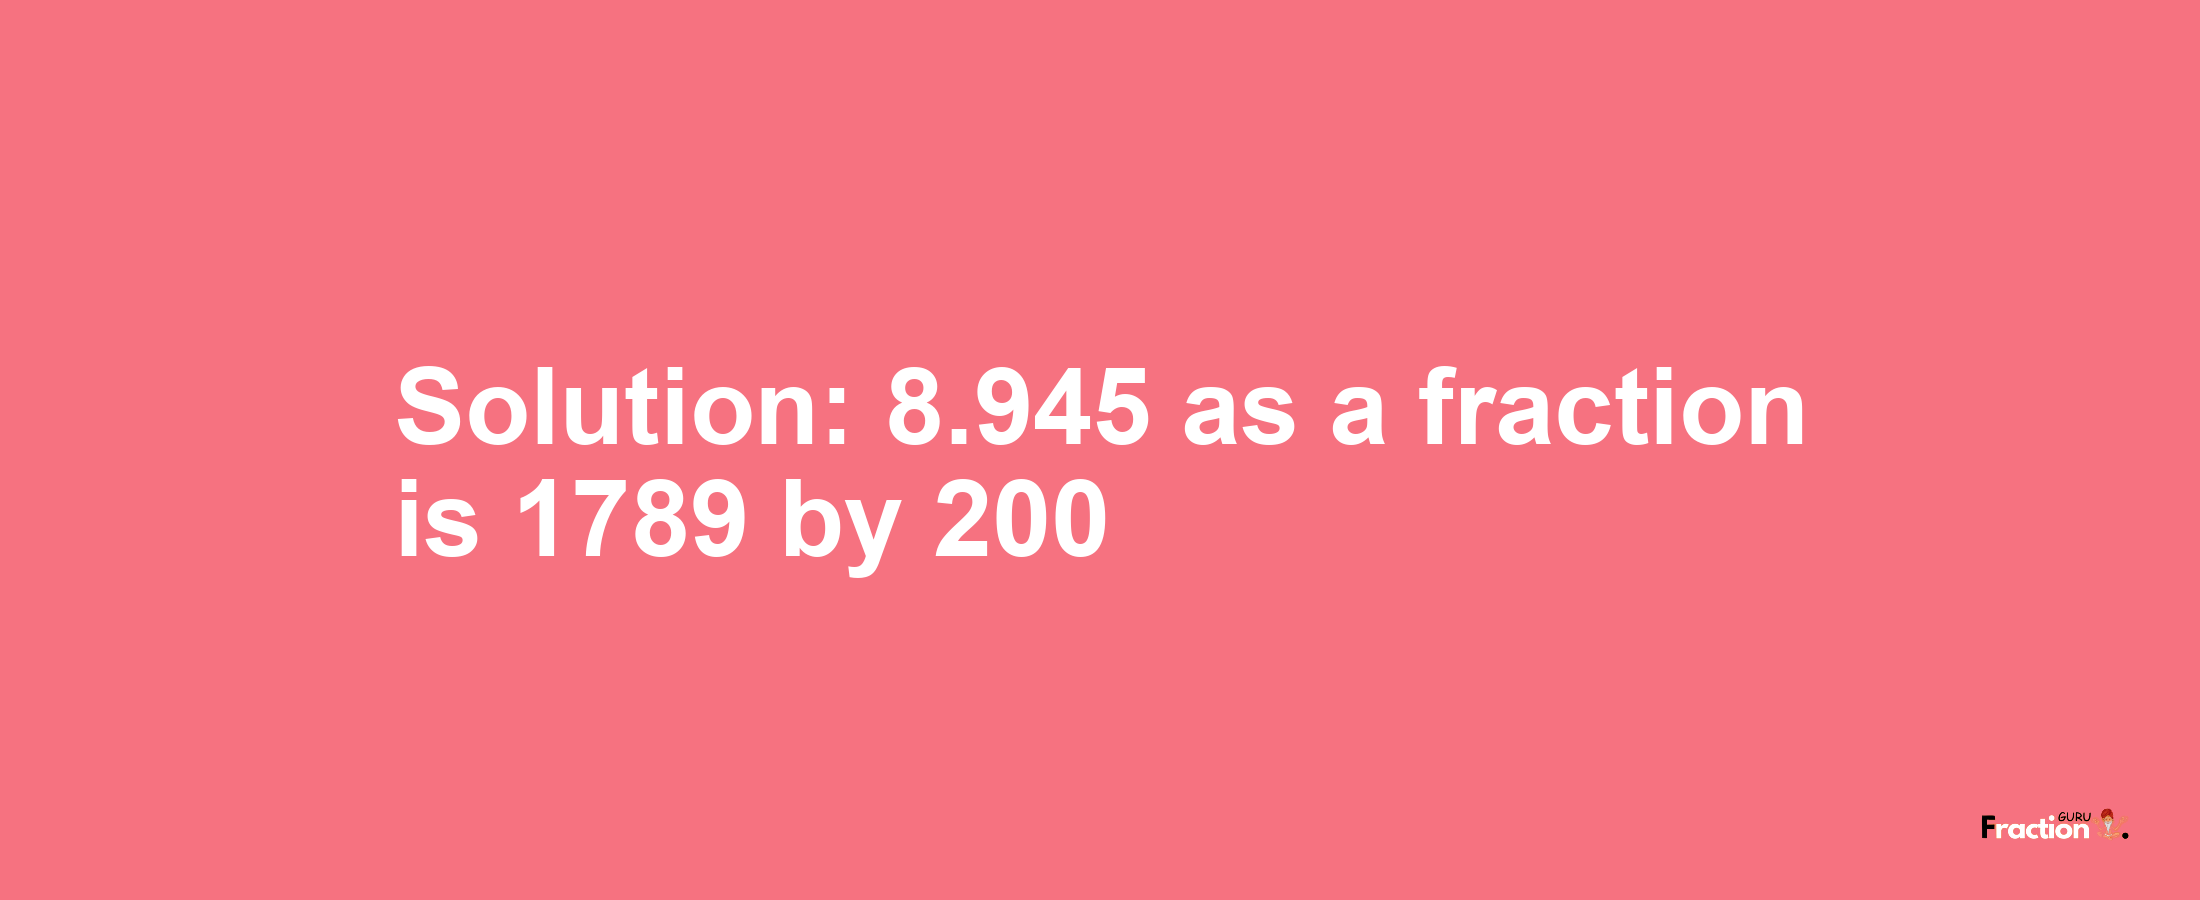 Solution:8.945 as a fraction is 1789/200